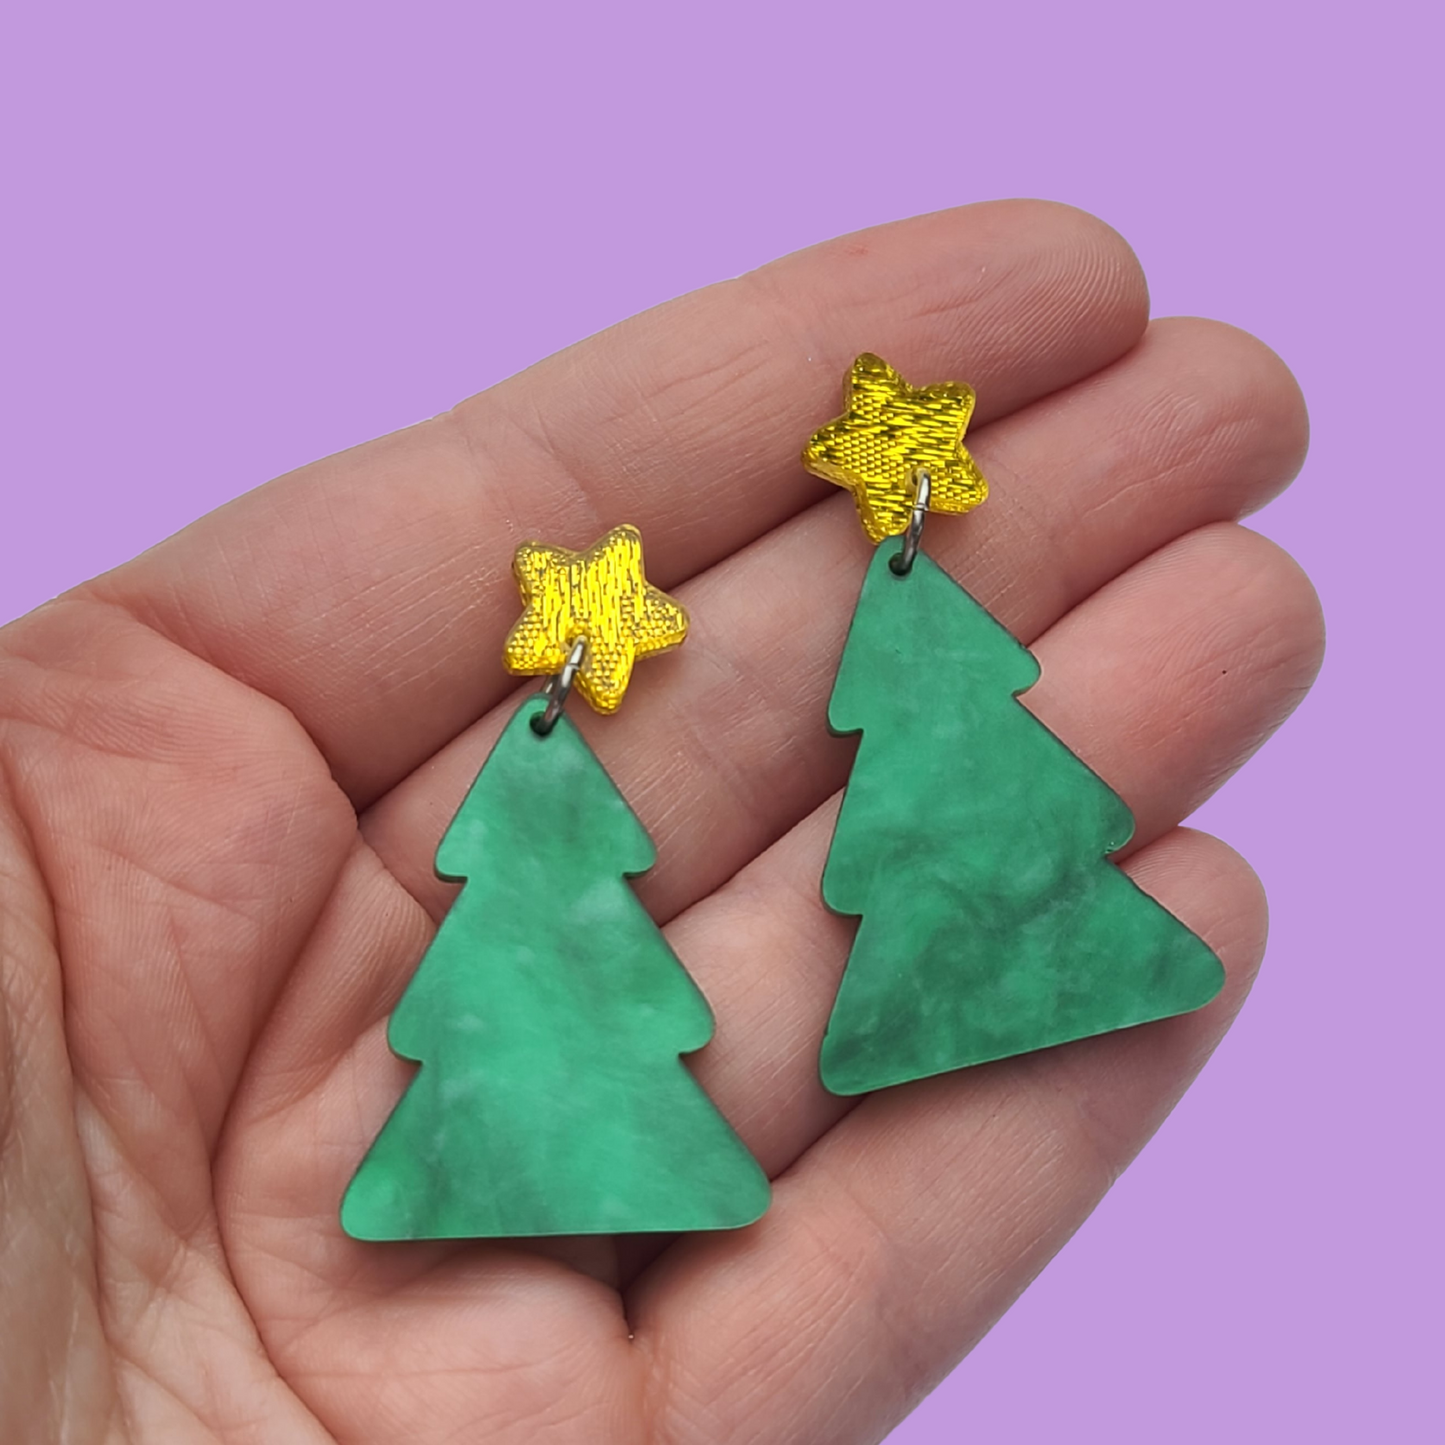 Christmas Trees - Earrings on Pearlized Green Acrylic with Gold Star Stud - Christmas